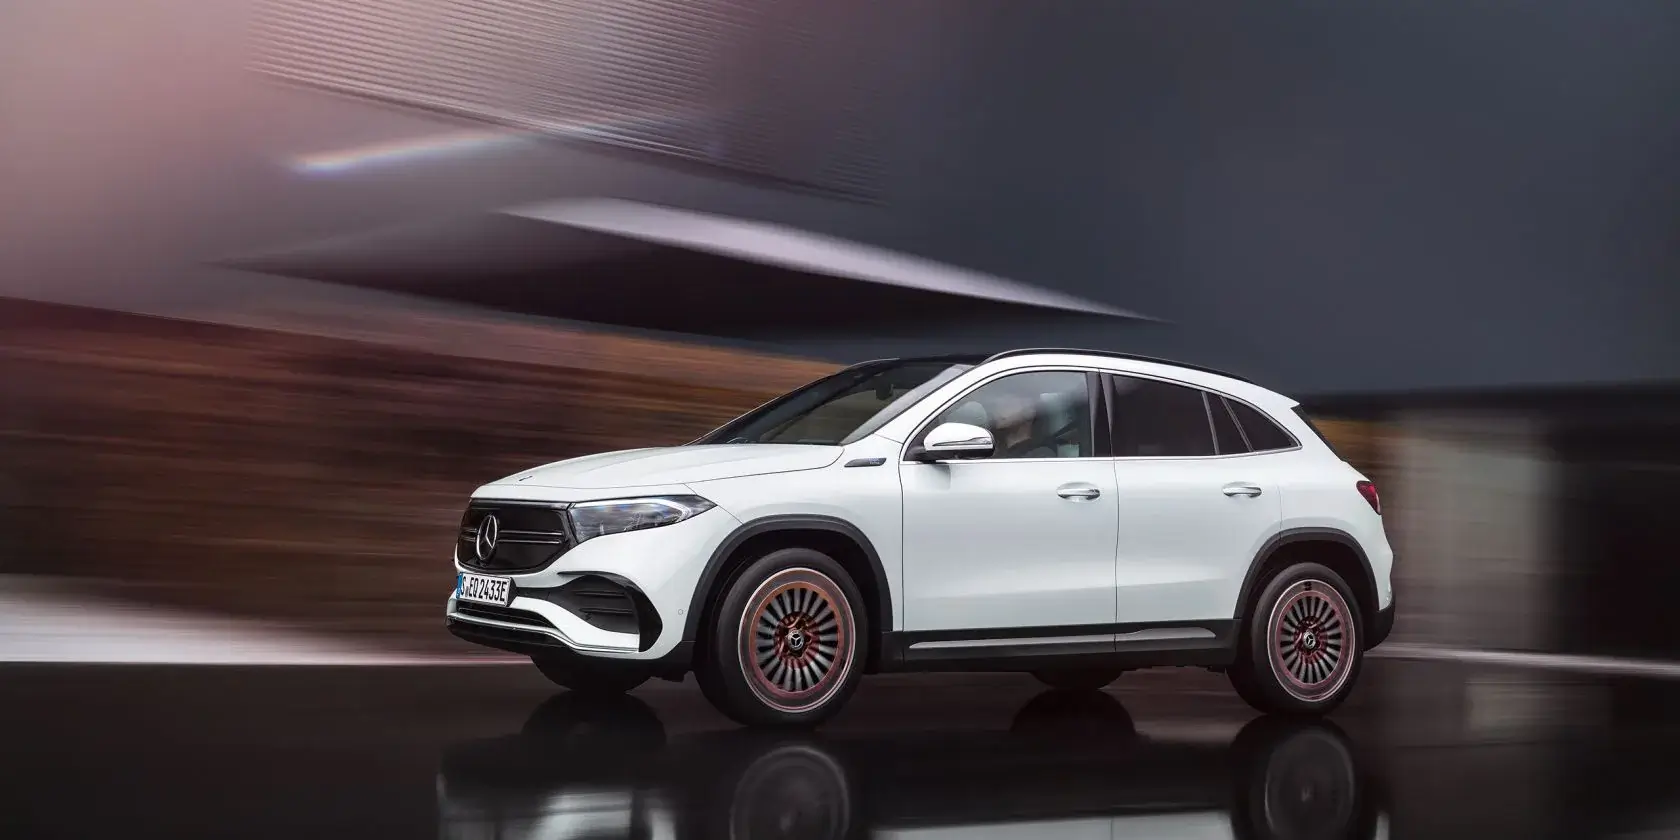 https://e-vehicleinfo.com/mercedes-benz-eqa-price-specifications-and-highlights/